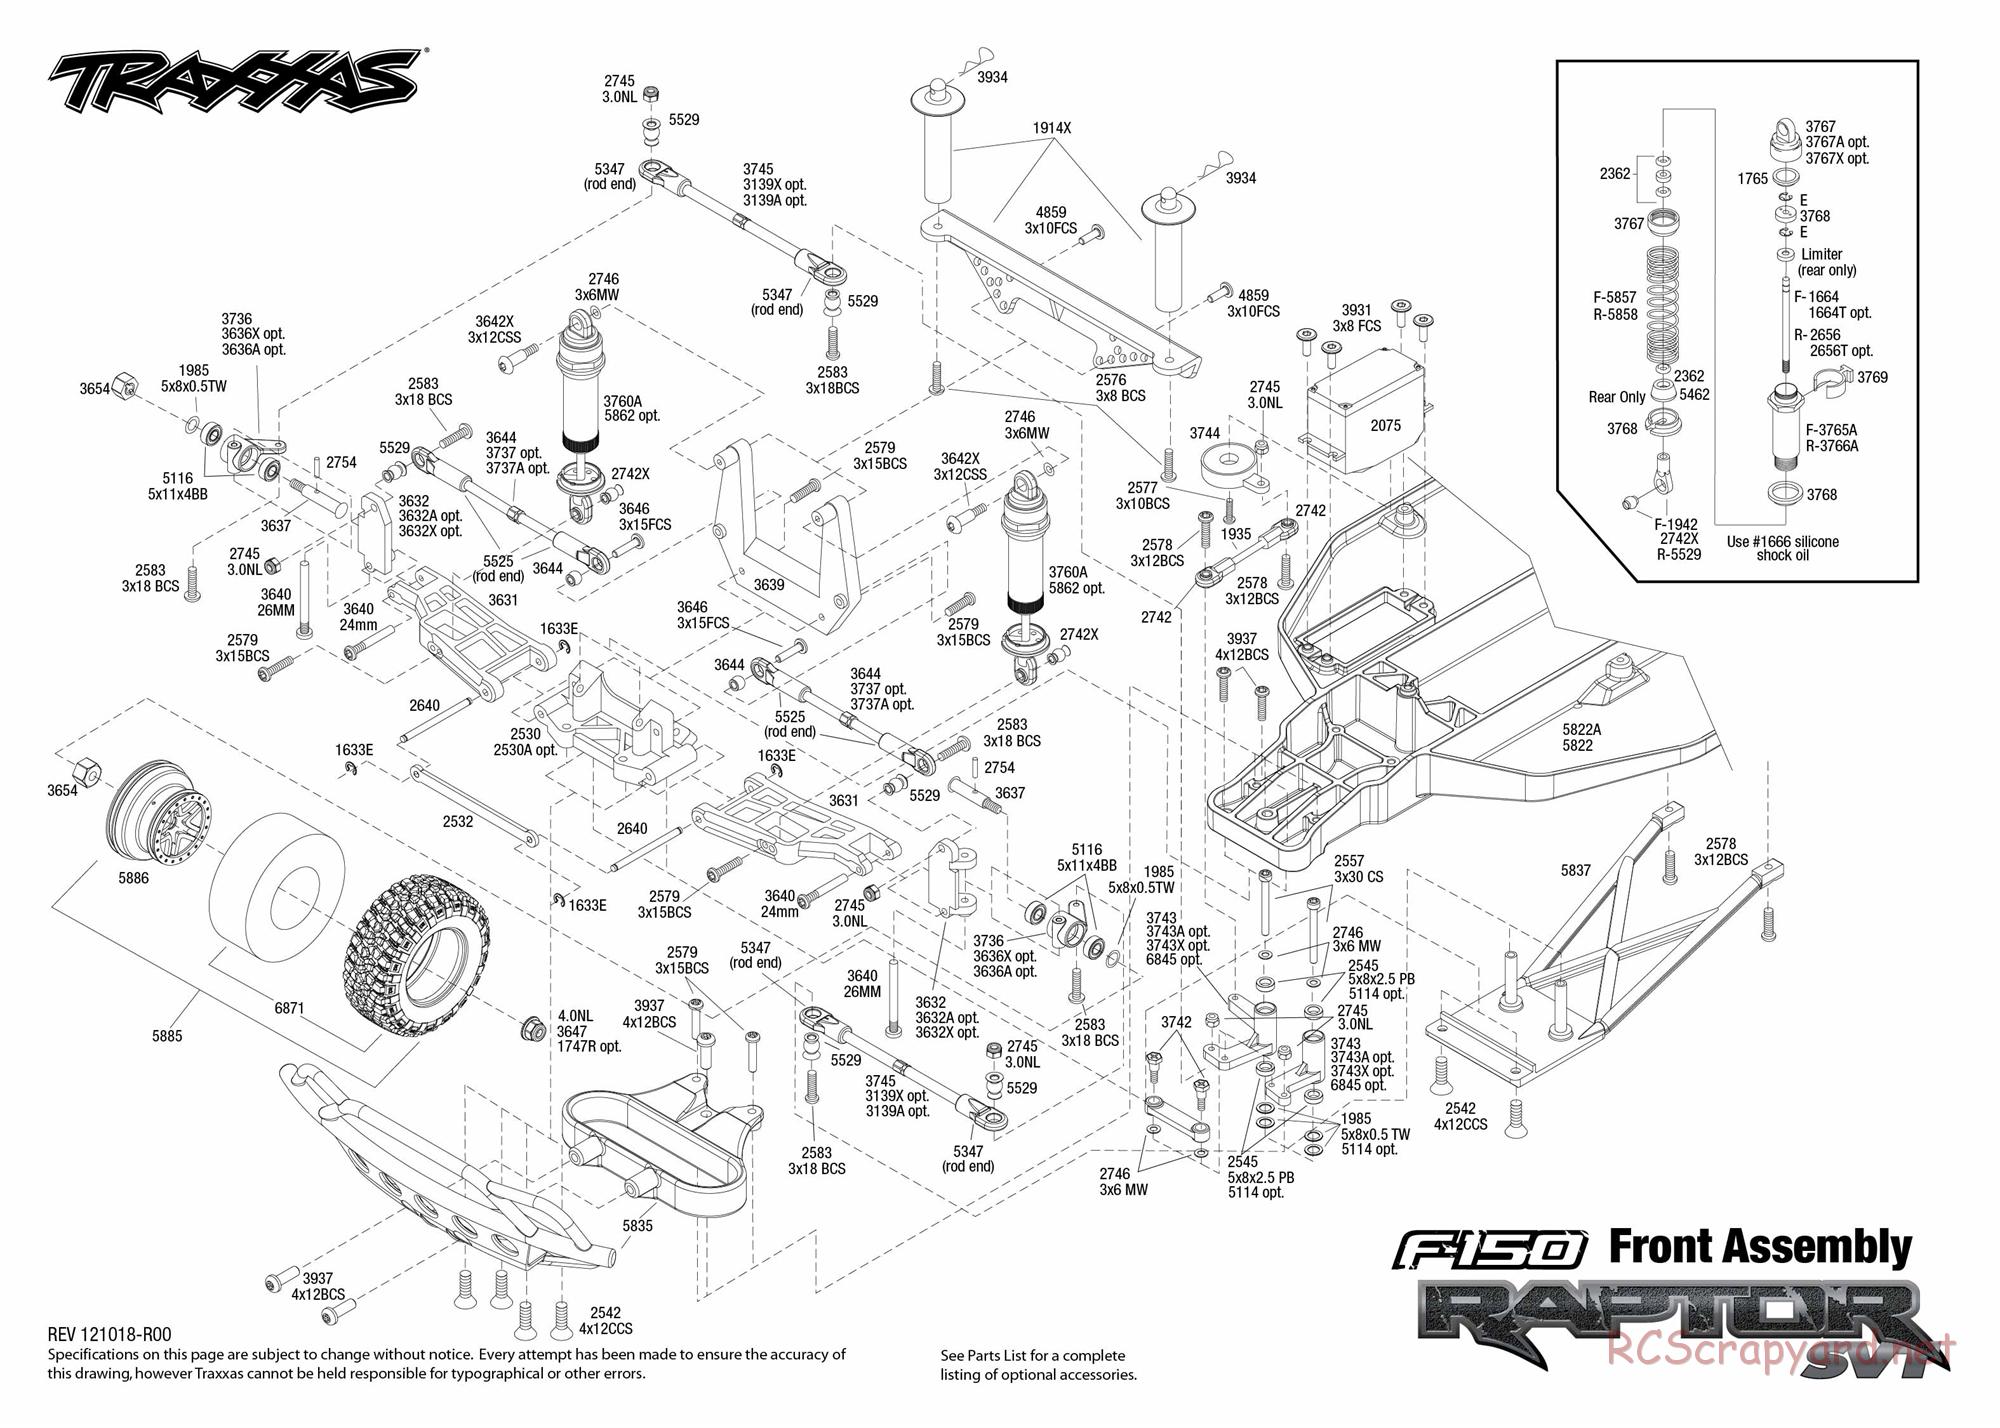 Traxxas - Ford F-150 SVT Raptor (2013) - Exploded Views - Page 2